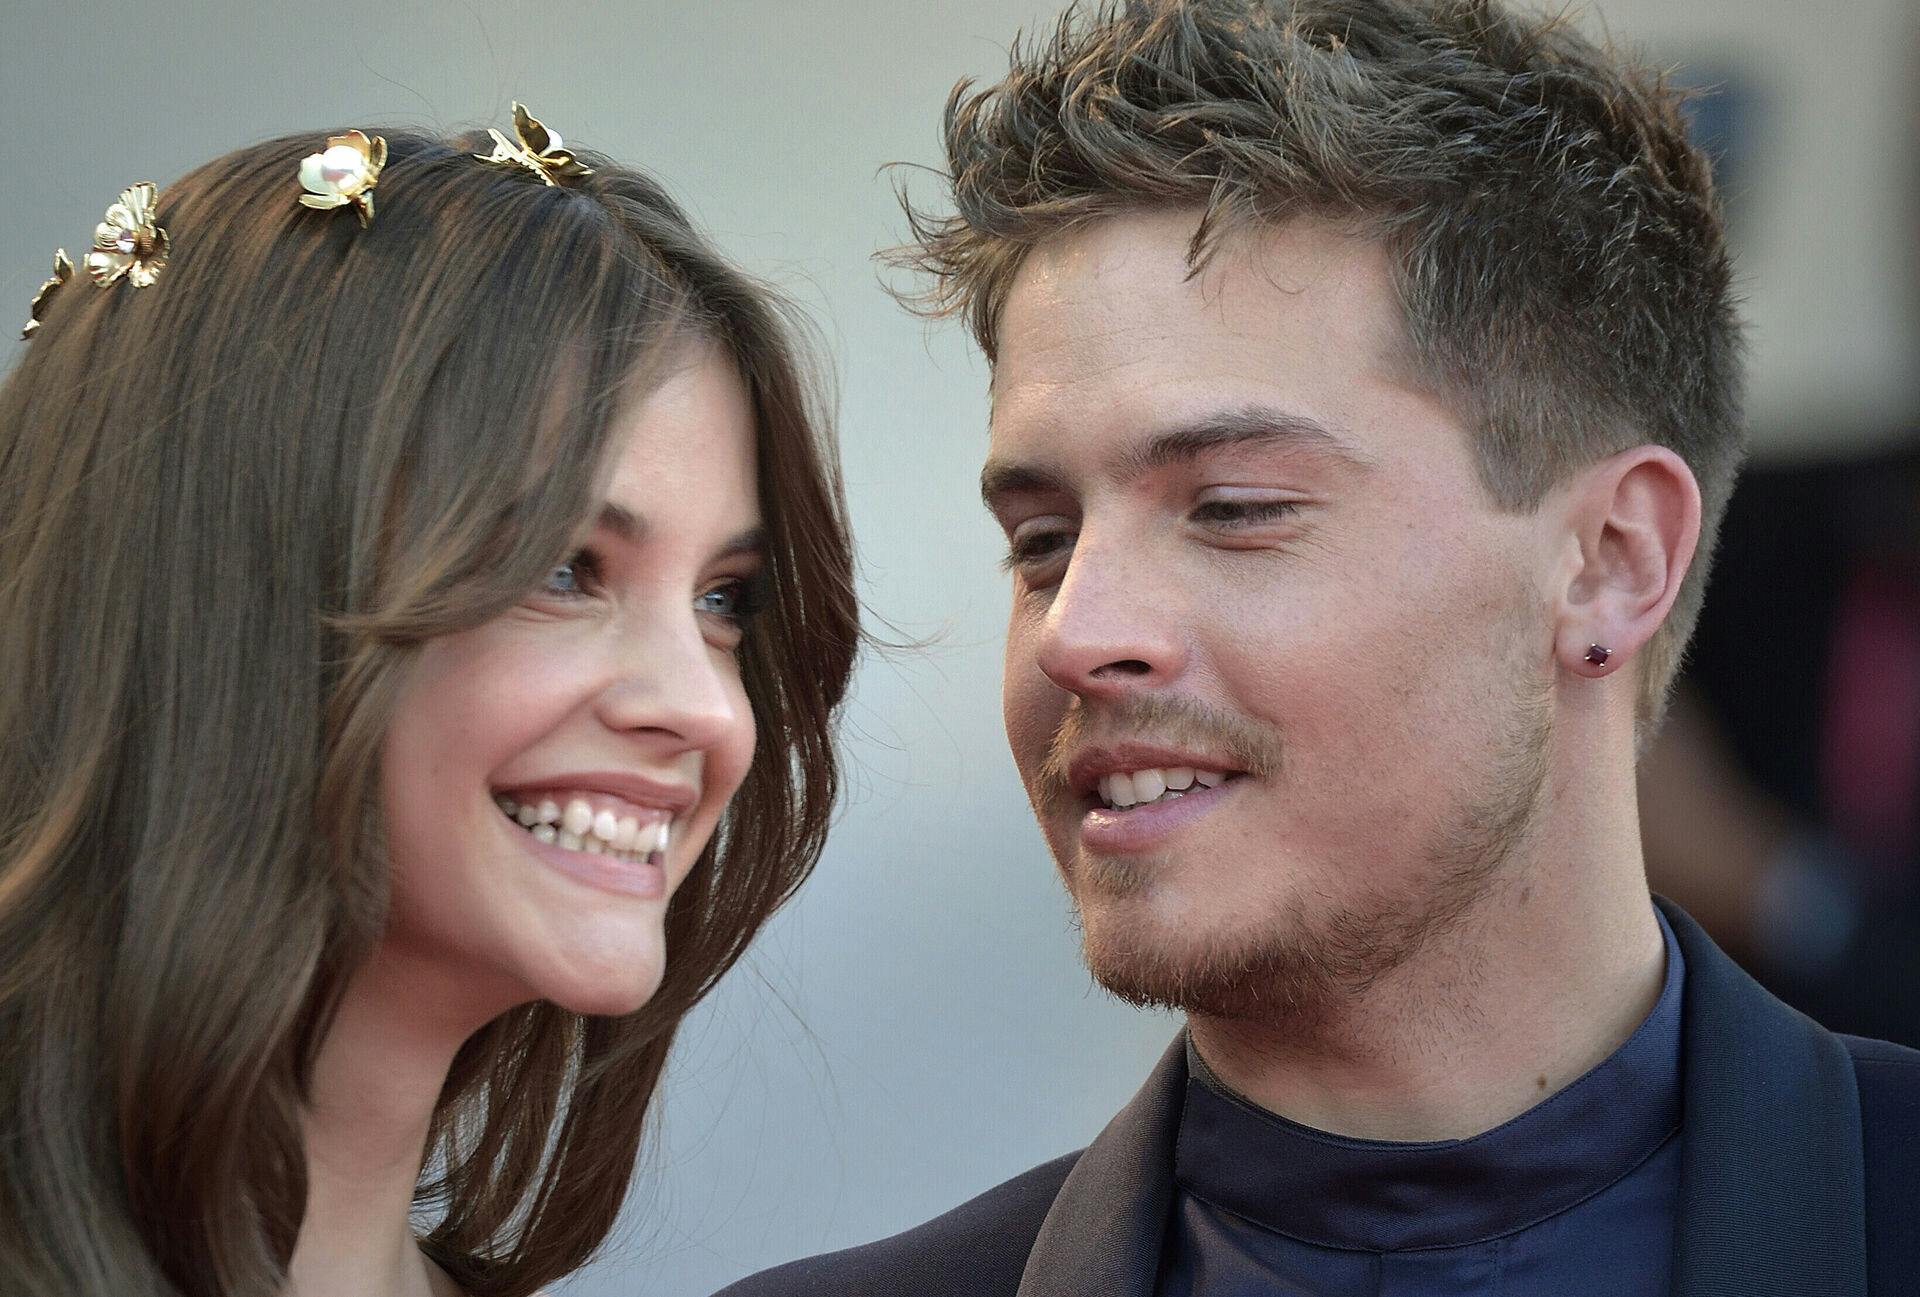 VENICE, ITALY - SEPTEMBER 02: Dylan Sprouse and Barbara Palvinattend the "Bones And All" red carpet at the 79th Venice International Film Festival on September 02, 2022 in Venice, Italy. Photo by: Rocco Spaziani/picture-alliance/dpa/AP Images